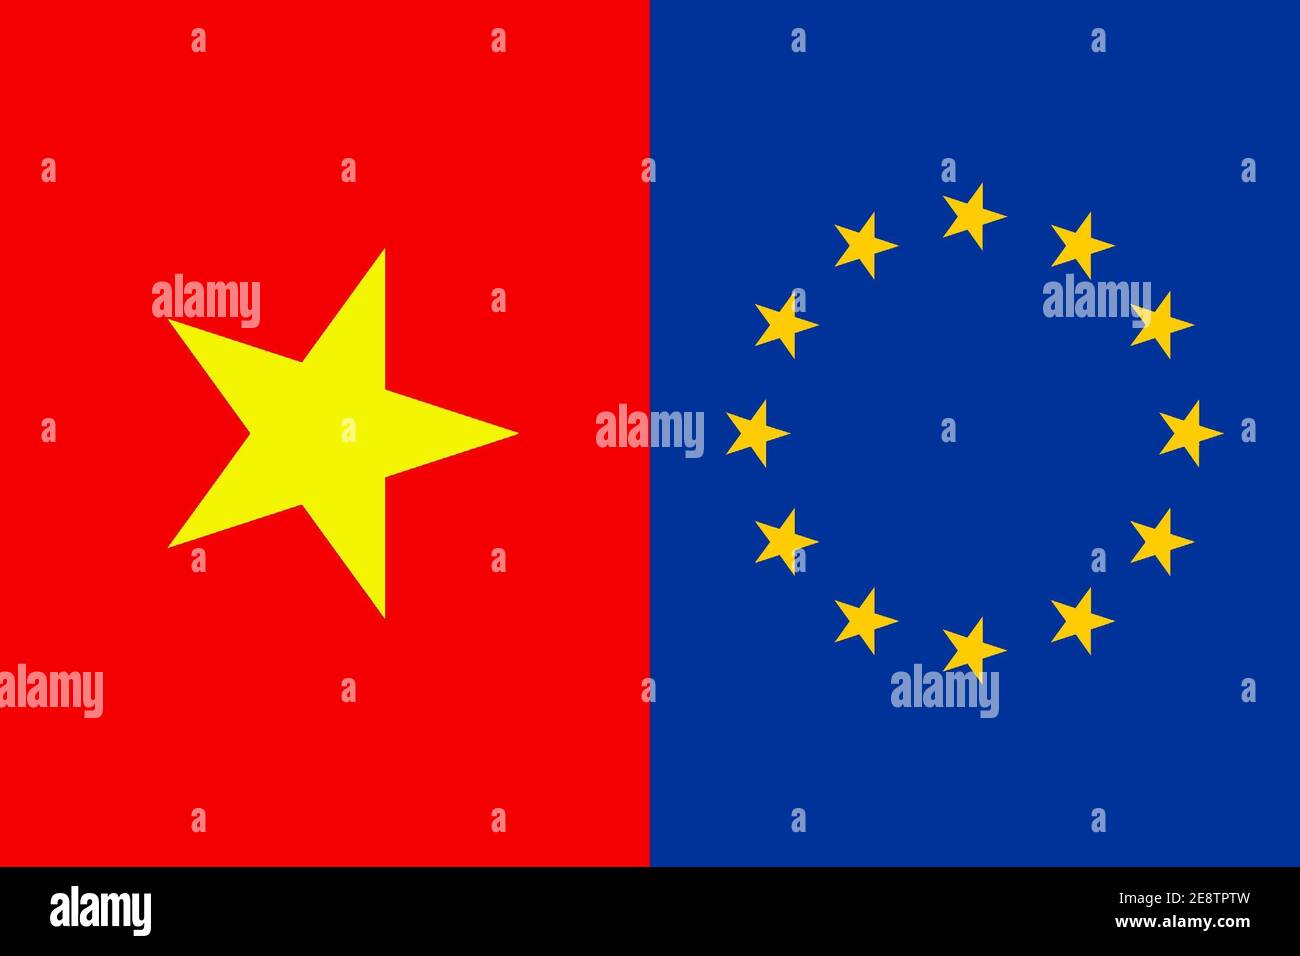 Illustration of the flags of Vietnam and the EU next to each other Stock Photo